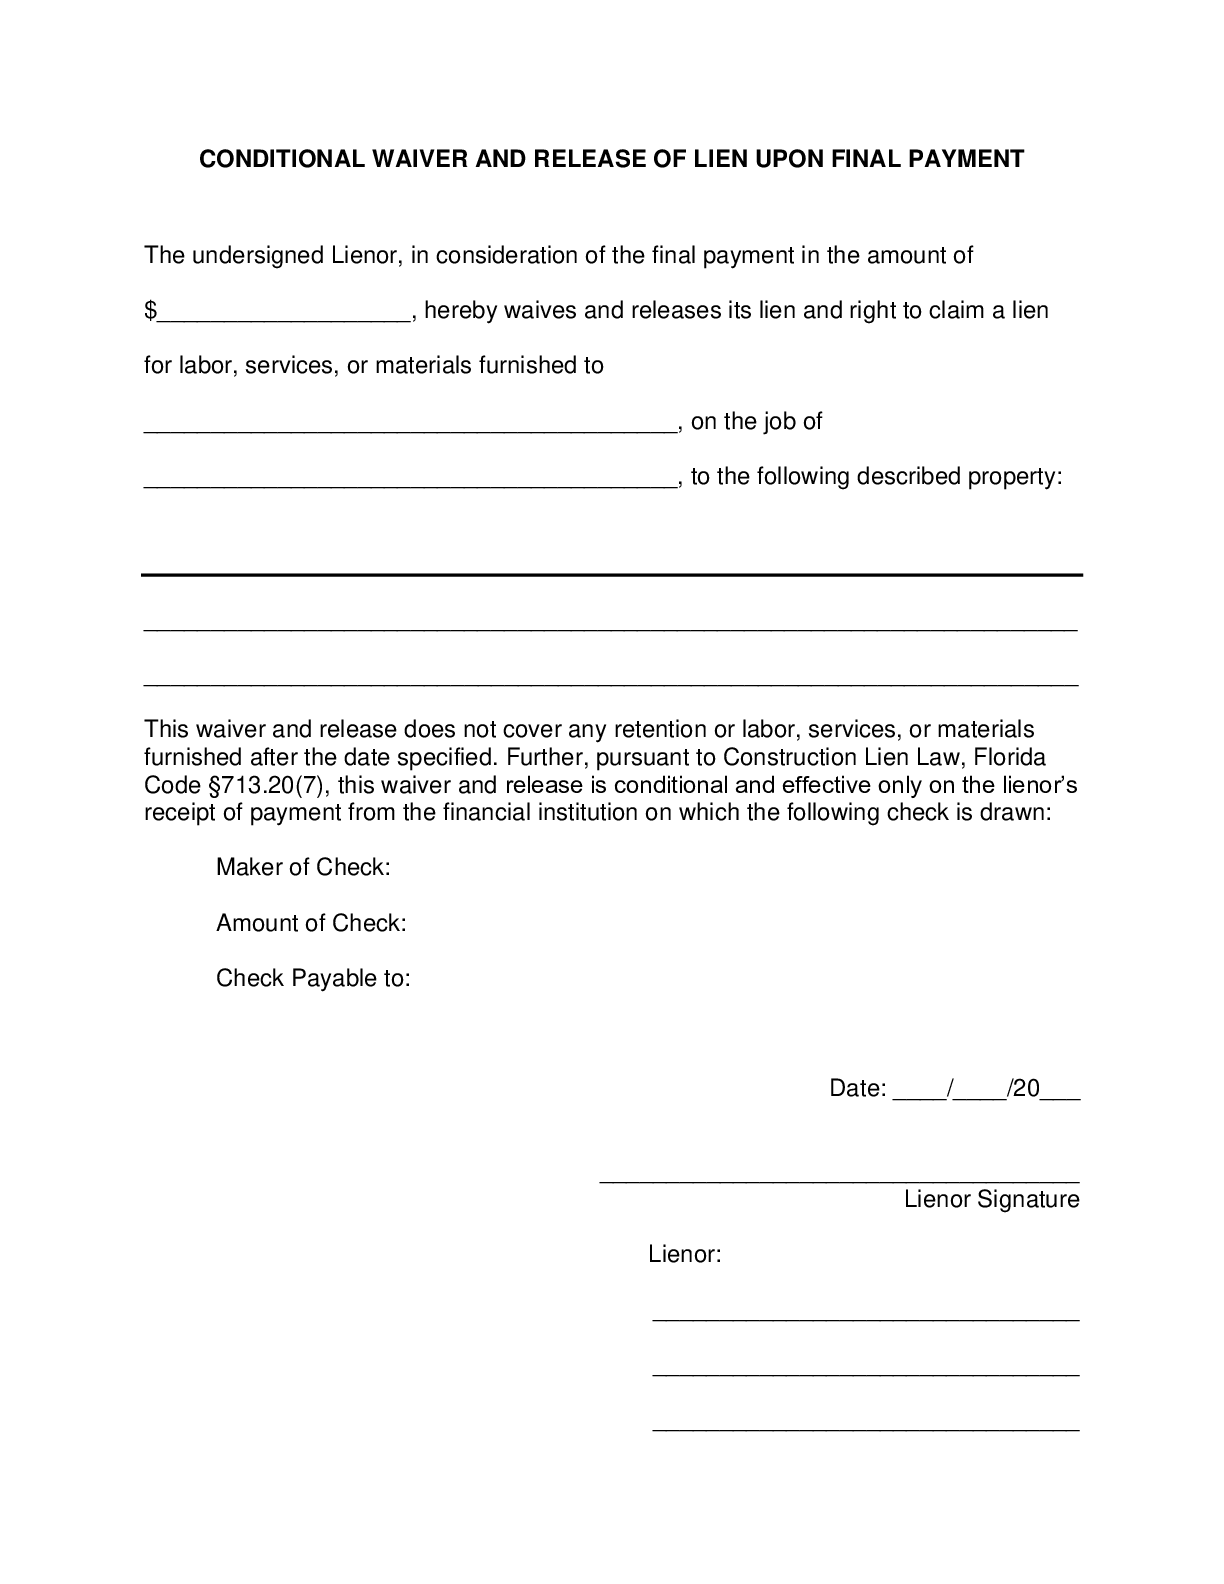 Florida Final Conditional Lien Waiver and Release Form - free from